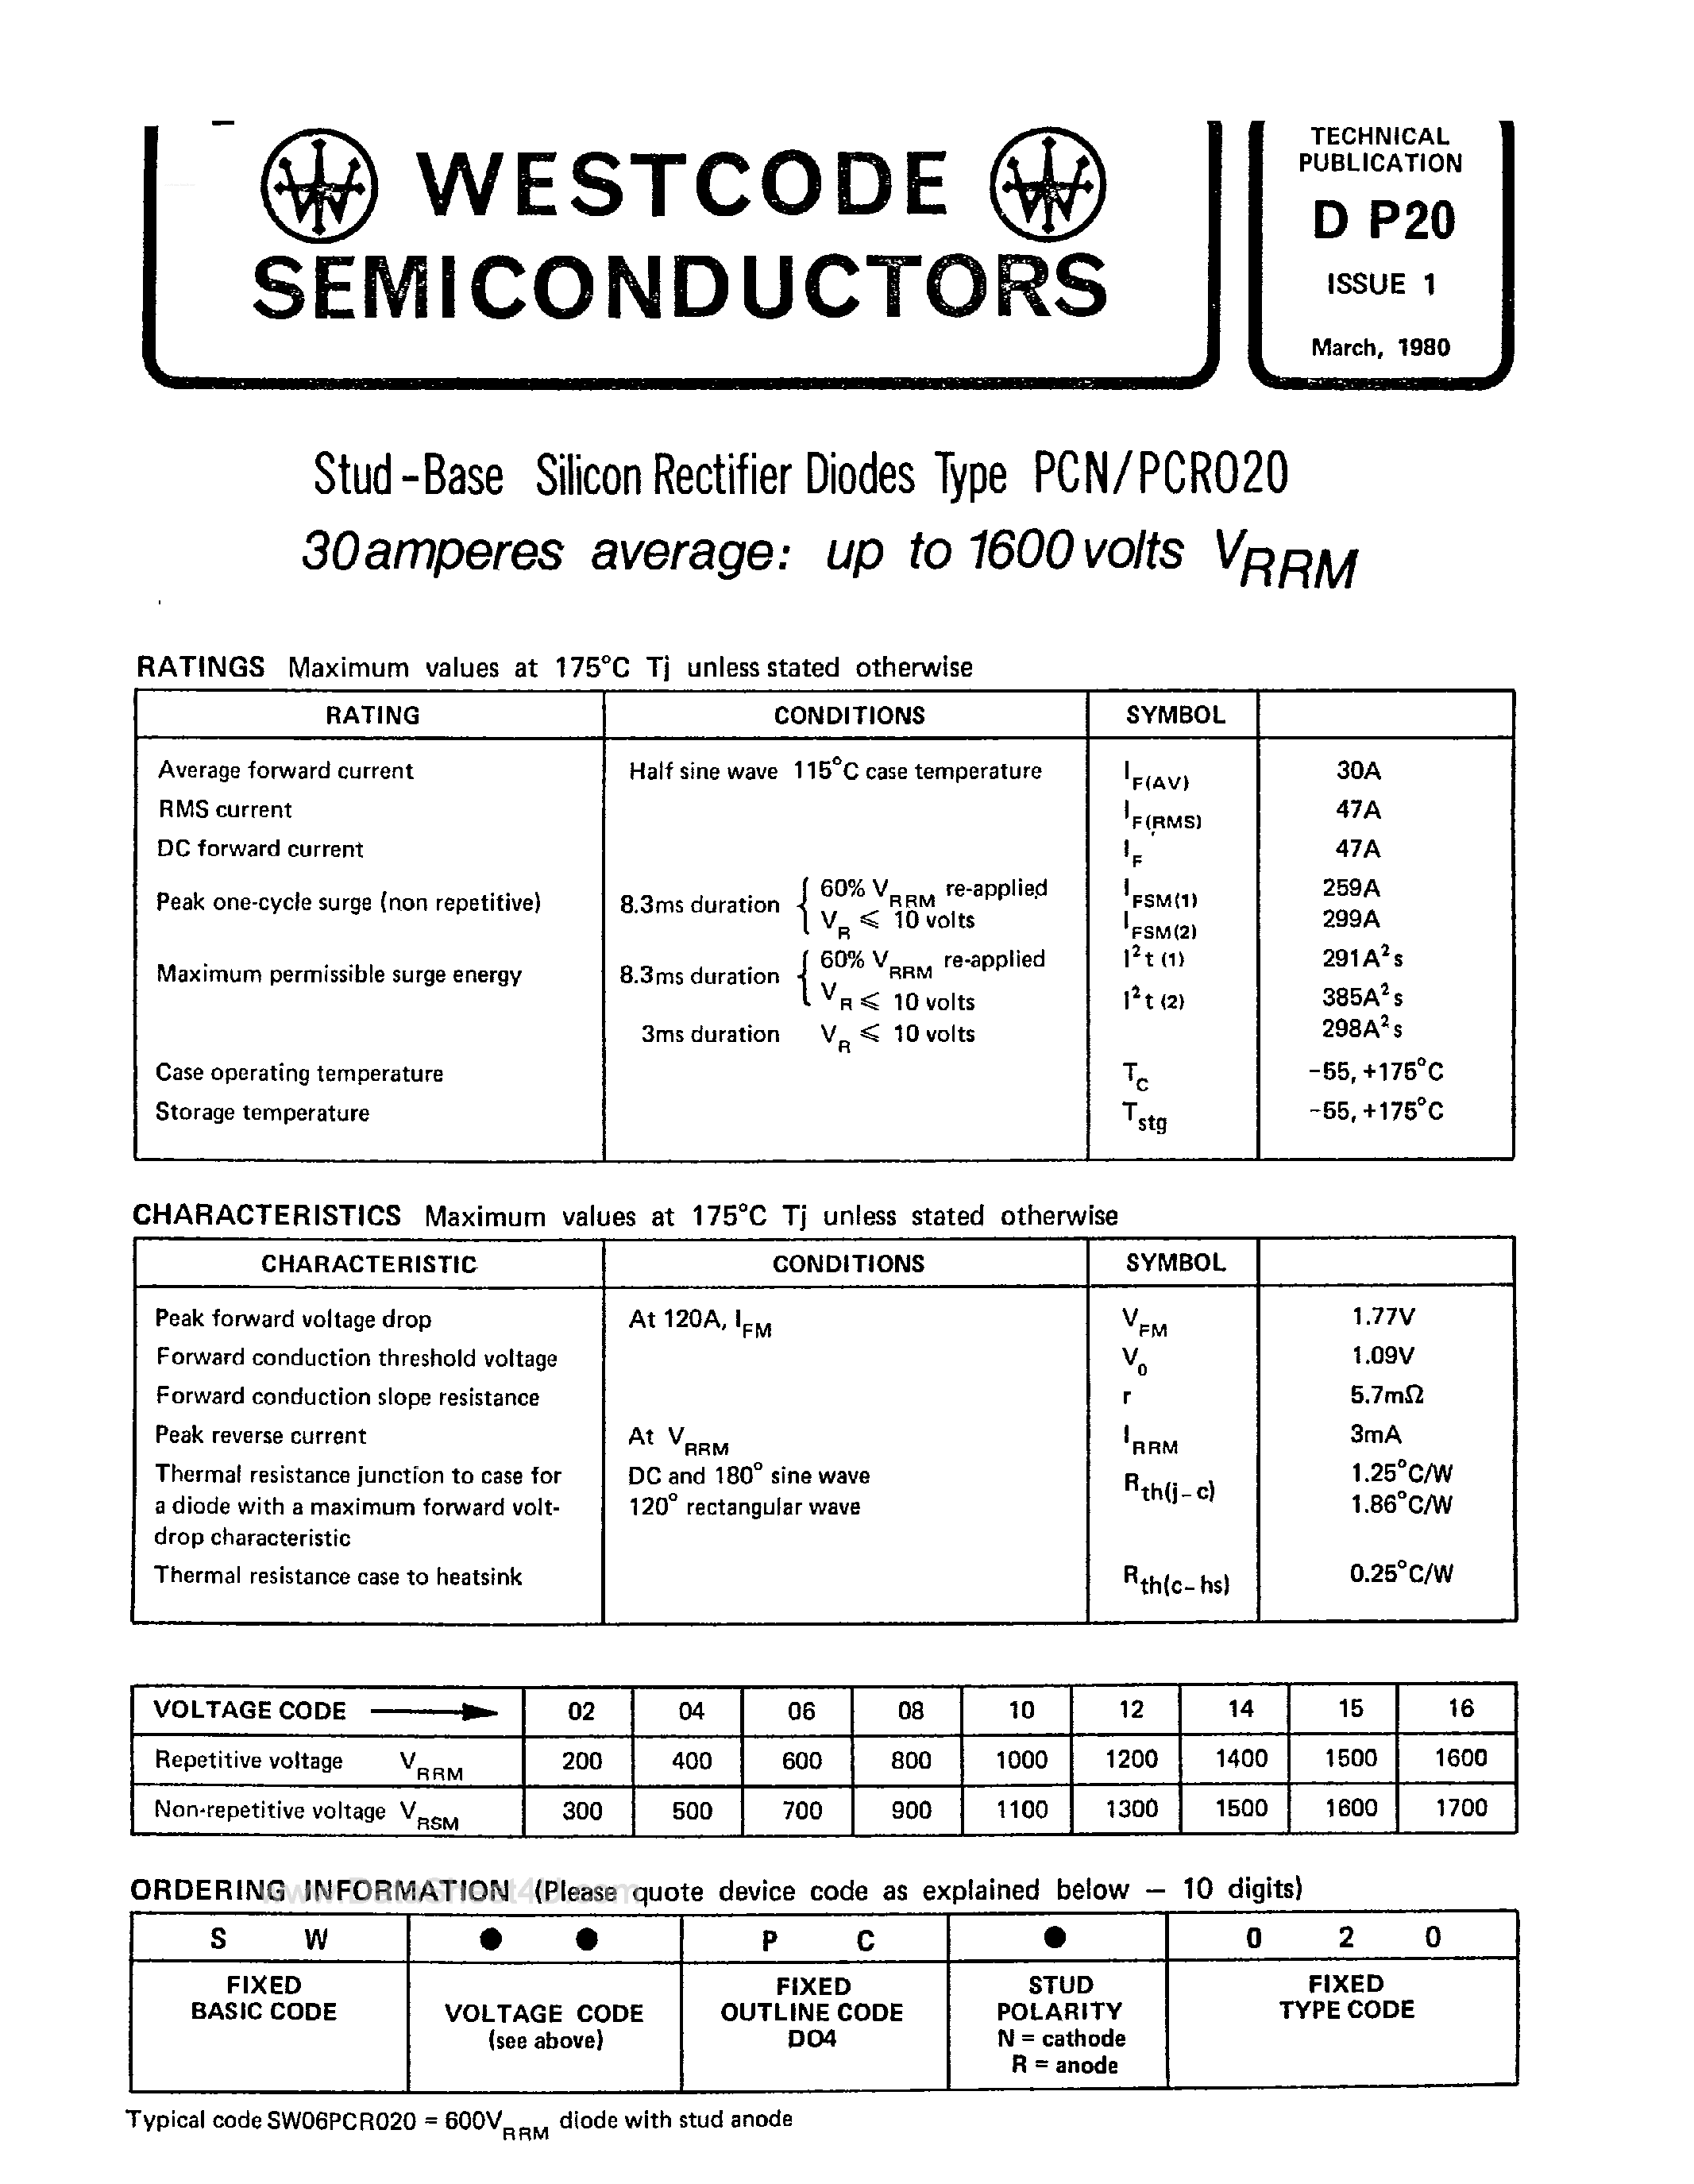 Datasheet SW15PCN020 - Stud Base Silicon Rectifier Diodes page 1